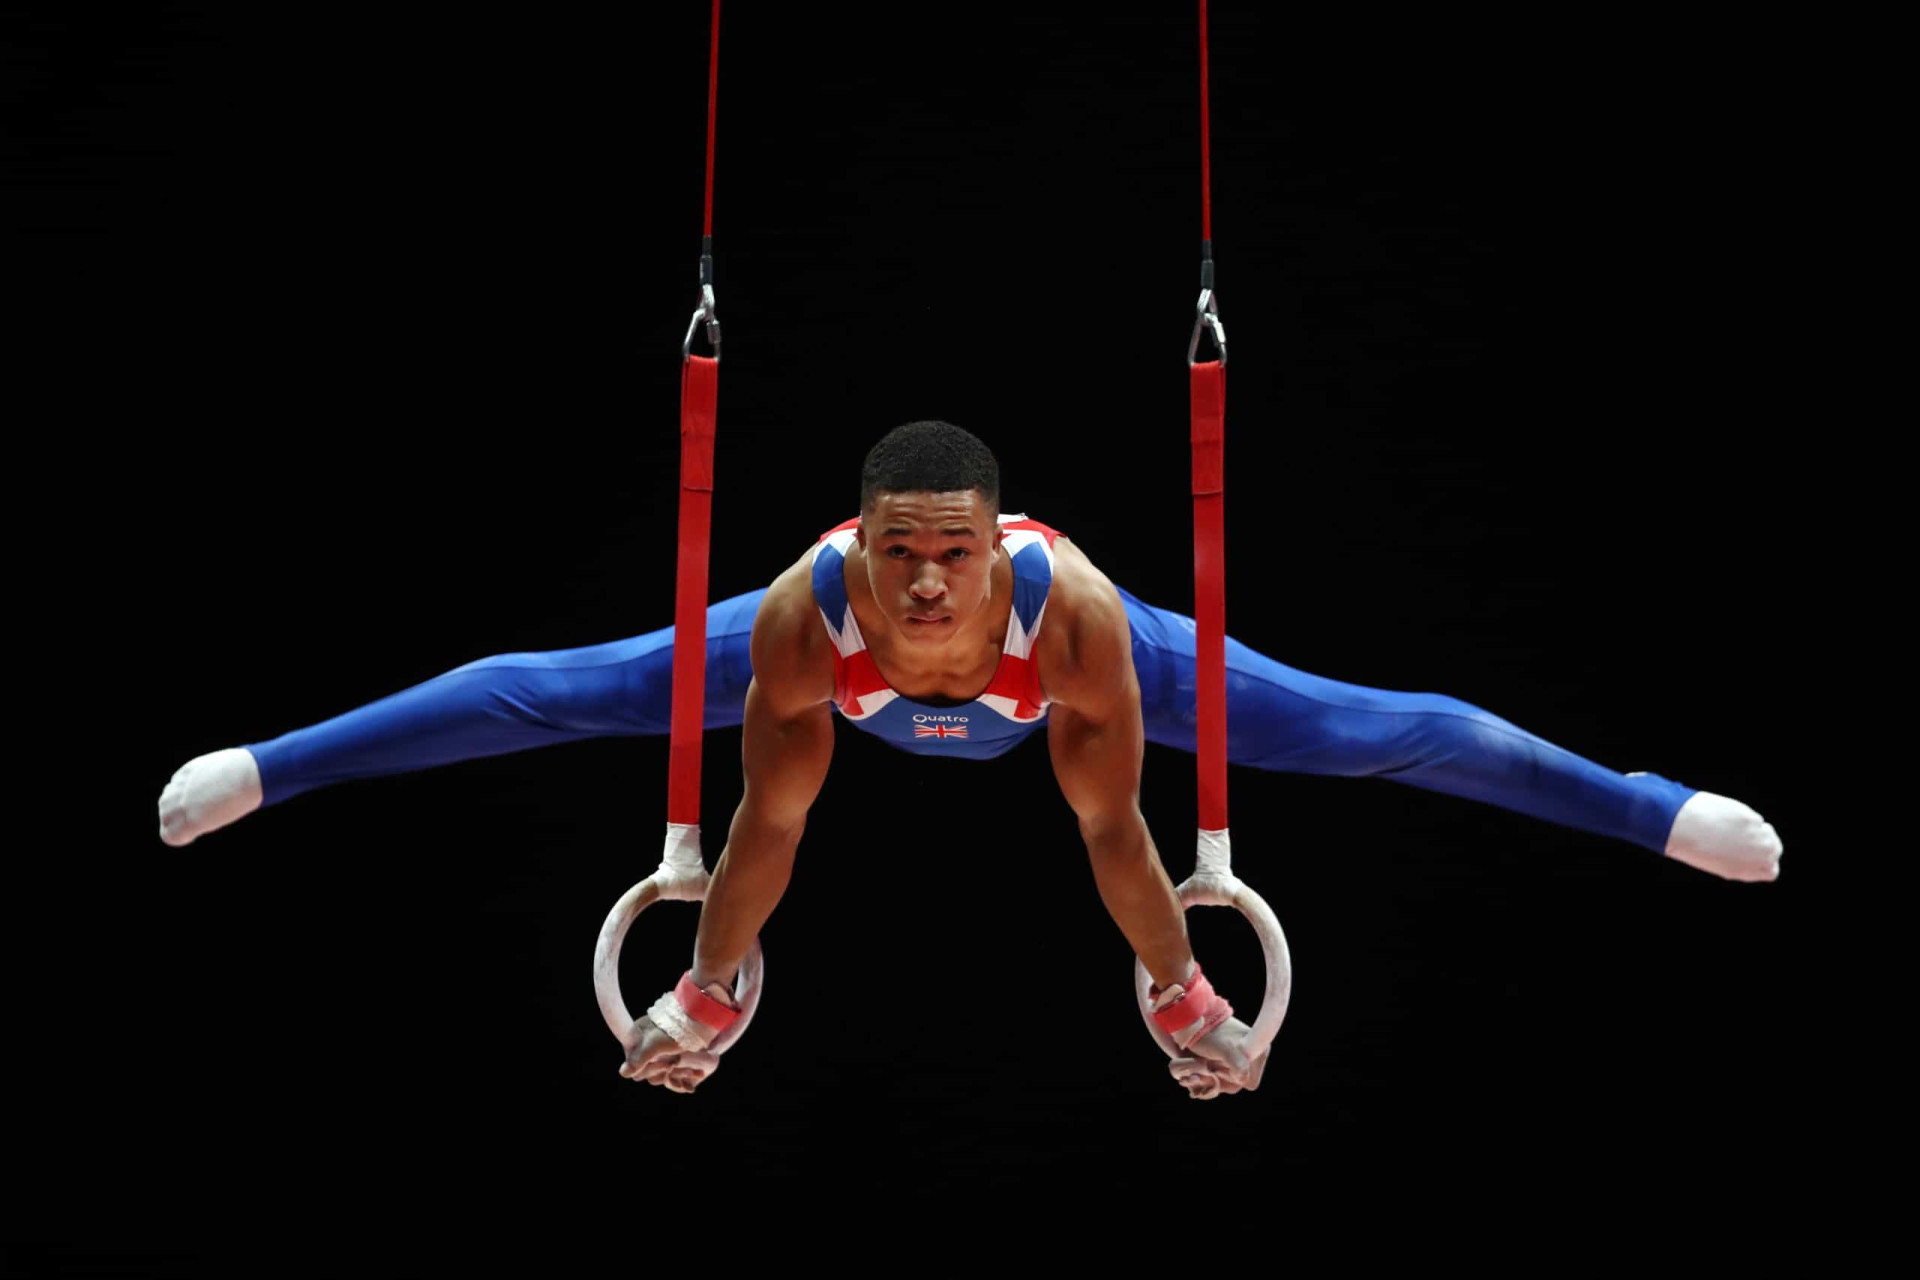 <div>The men's still rings competition made its debut at the first modern Olympics in 1896. The apparatus was invented in the early 19th century by German gymnastics educator Friedrich Jahn (1778–1852), known as the father of gymnastics.</div><p><a href="https://www.msn.com/en-ph/community/channel/vid-7xx8mnucu55yw63we9va2gwr7uihbxwc68fxqp25x6tg4ftibpra?cvid=94631541bc0f4f89bfd59158d696ad7e">Follow us and access great exclusive content every day</a></p>